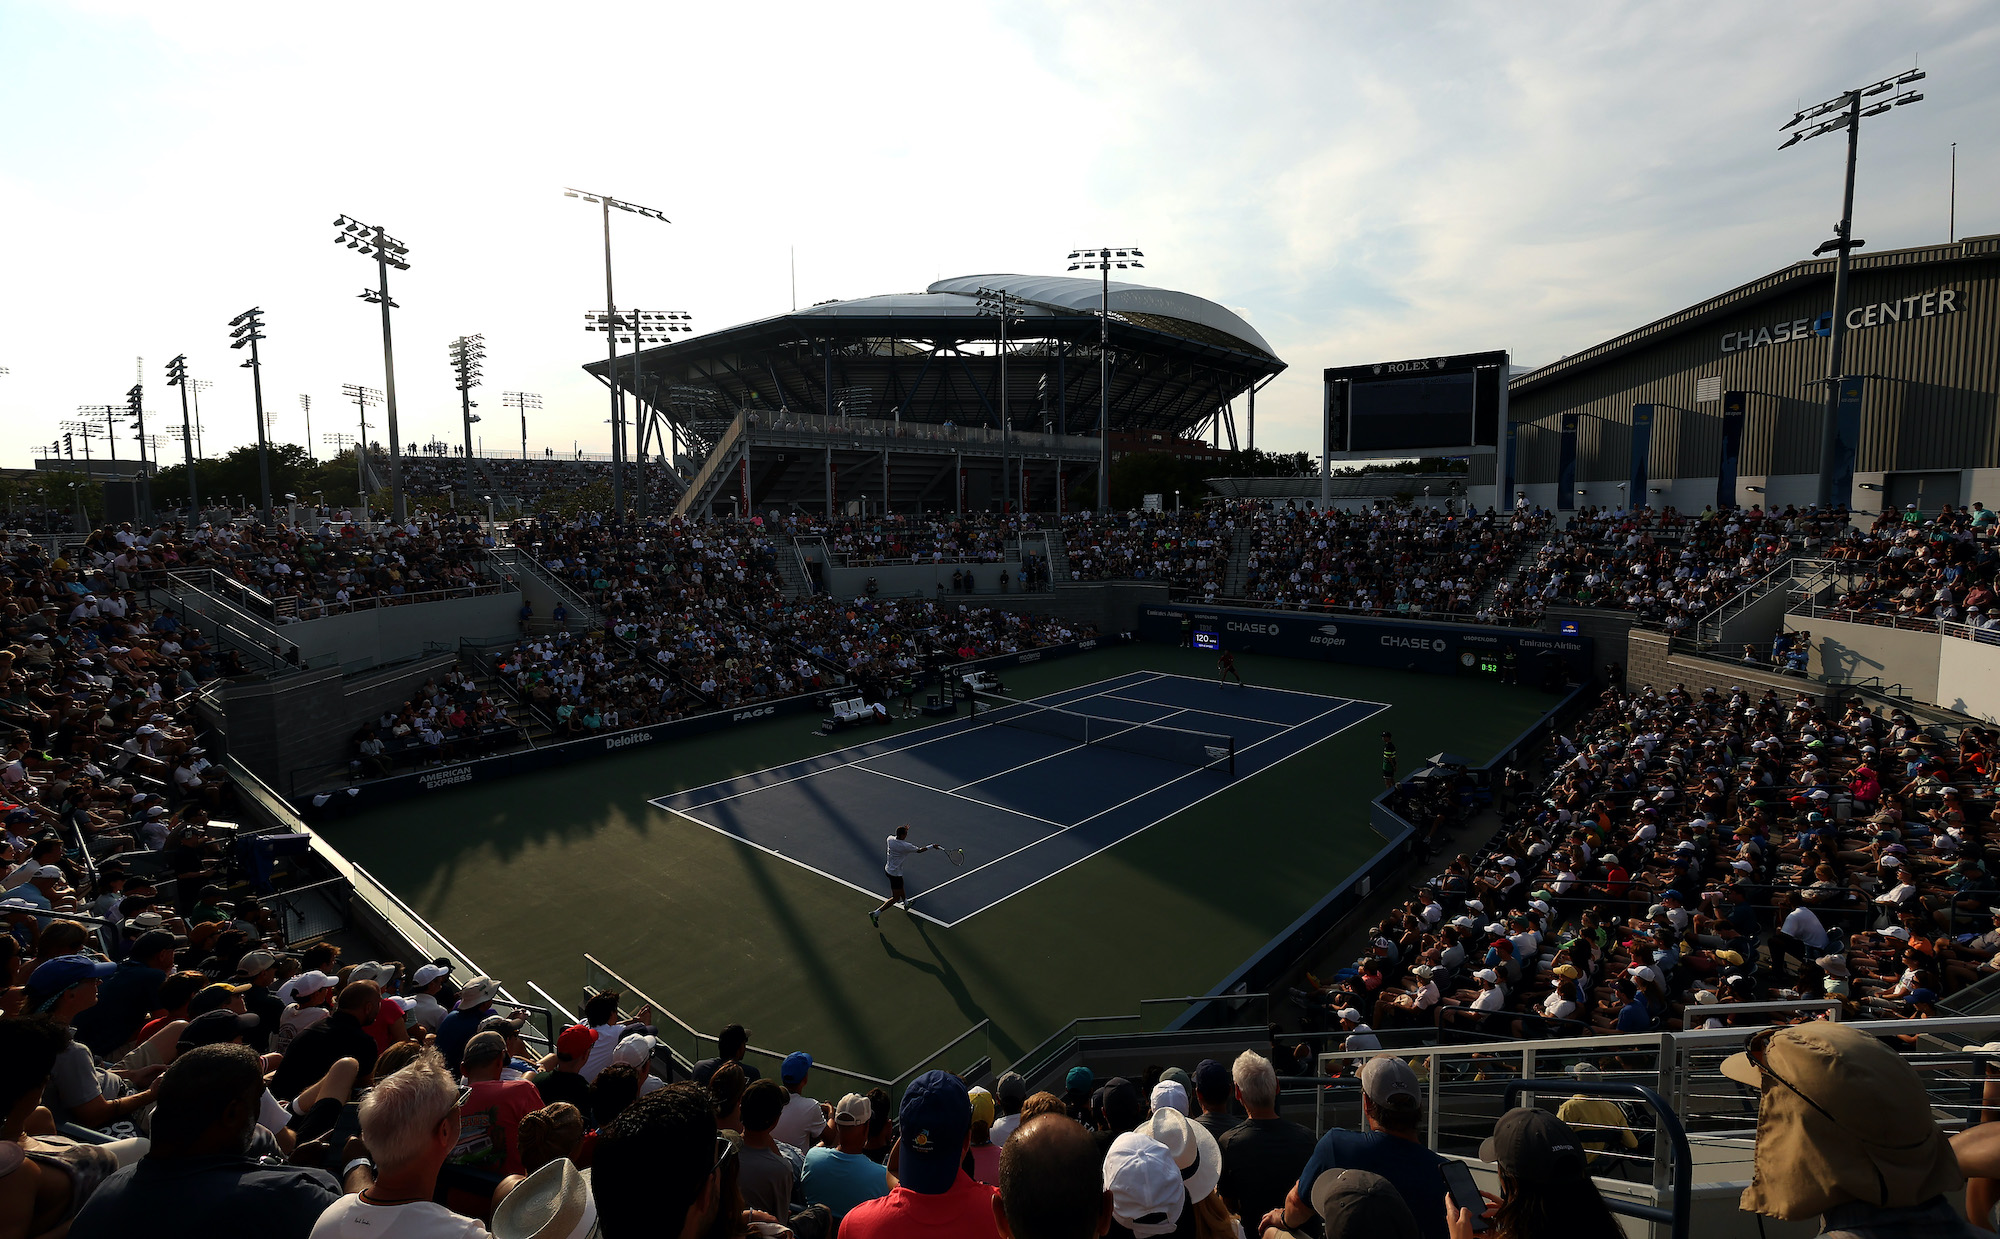 A crowd shot of Court 17 at the U.S. Open.